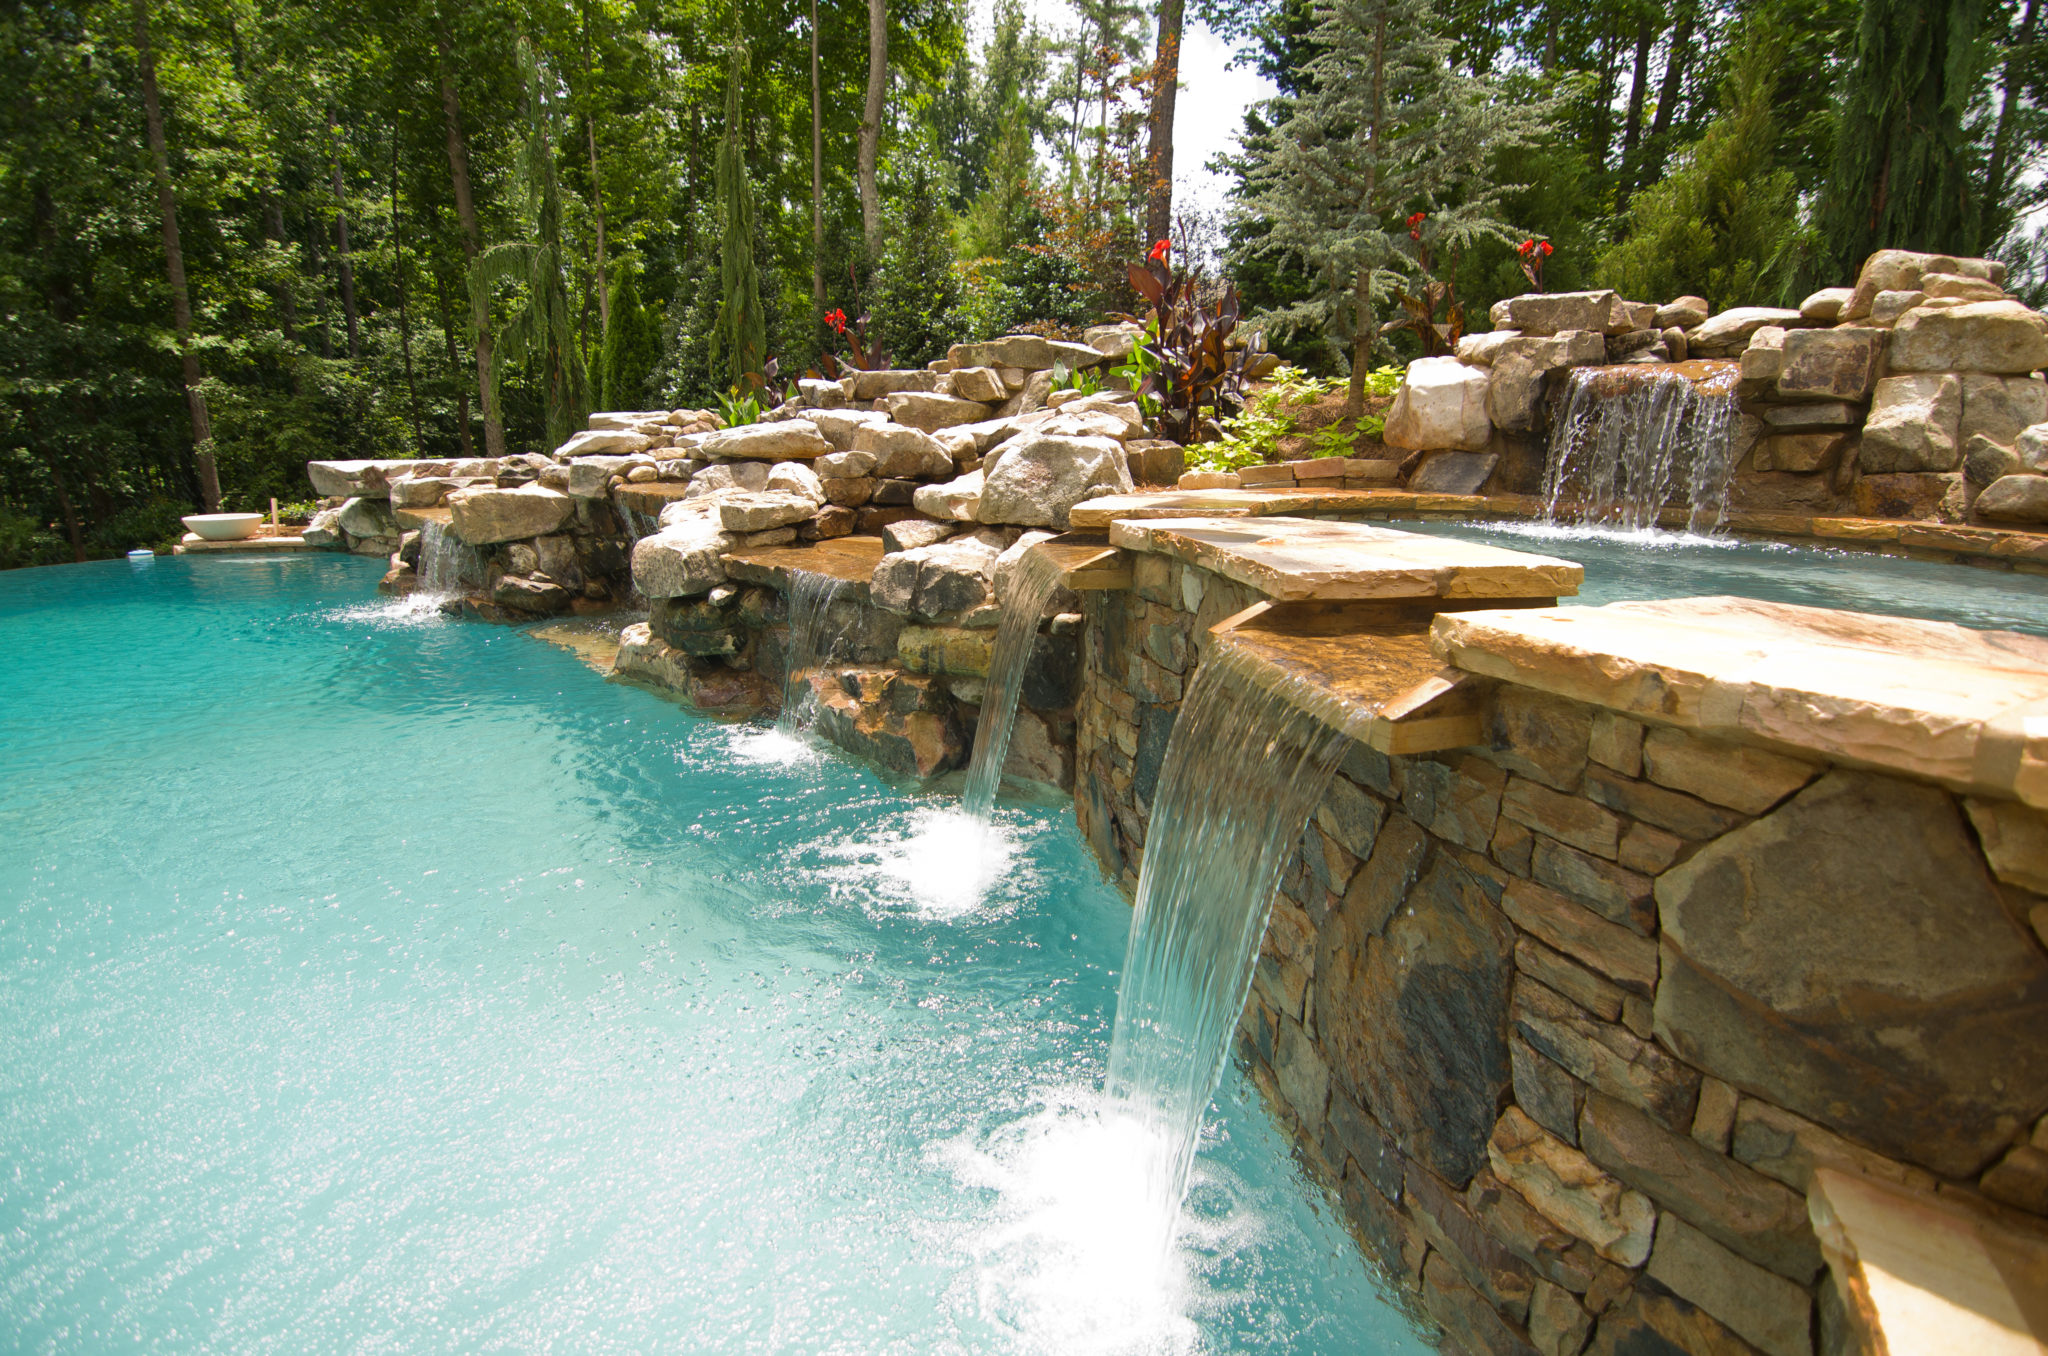 A custom freeform pool with a boulder waterfall spilling into a spa, surrounded by lush greenery and lounge chairs.